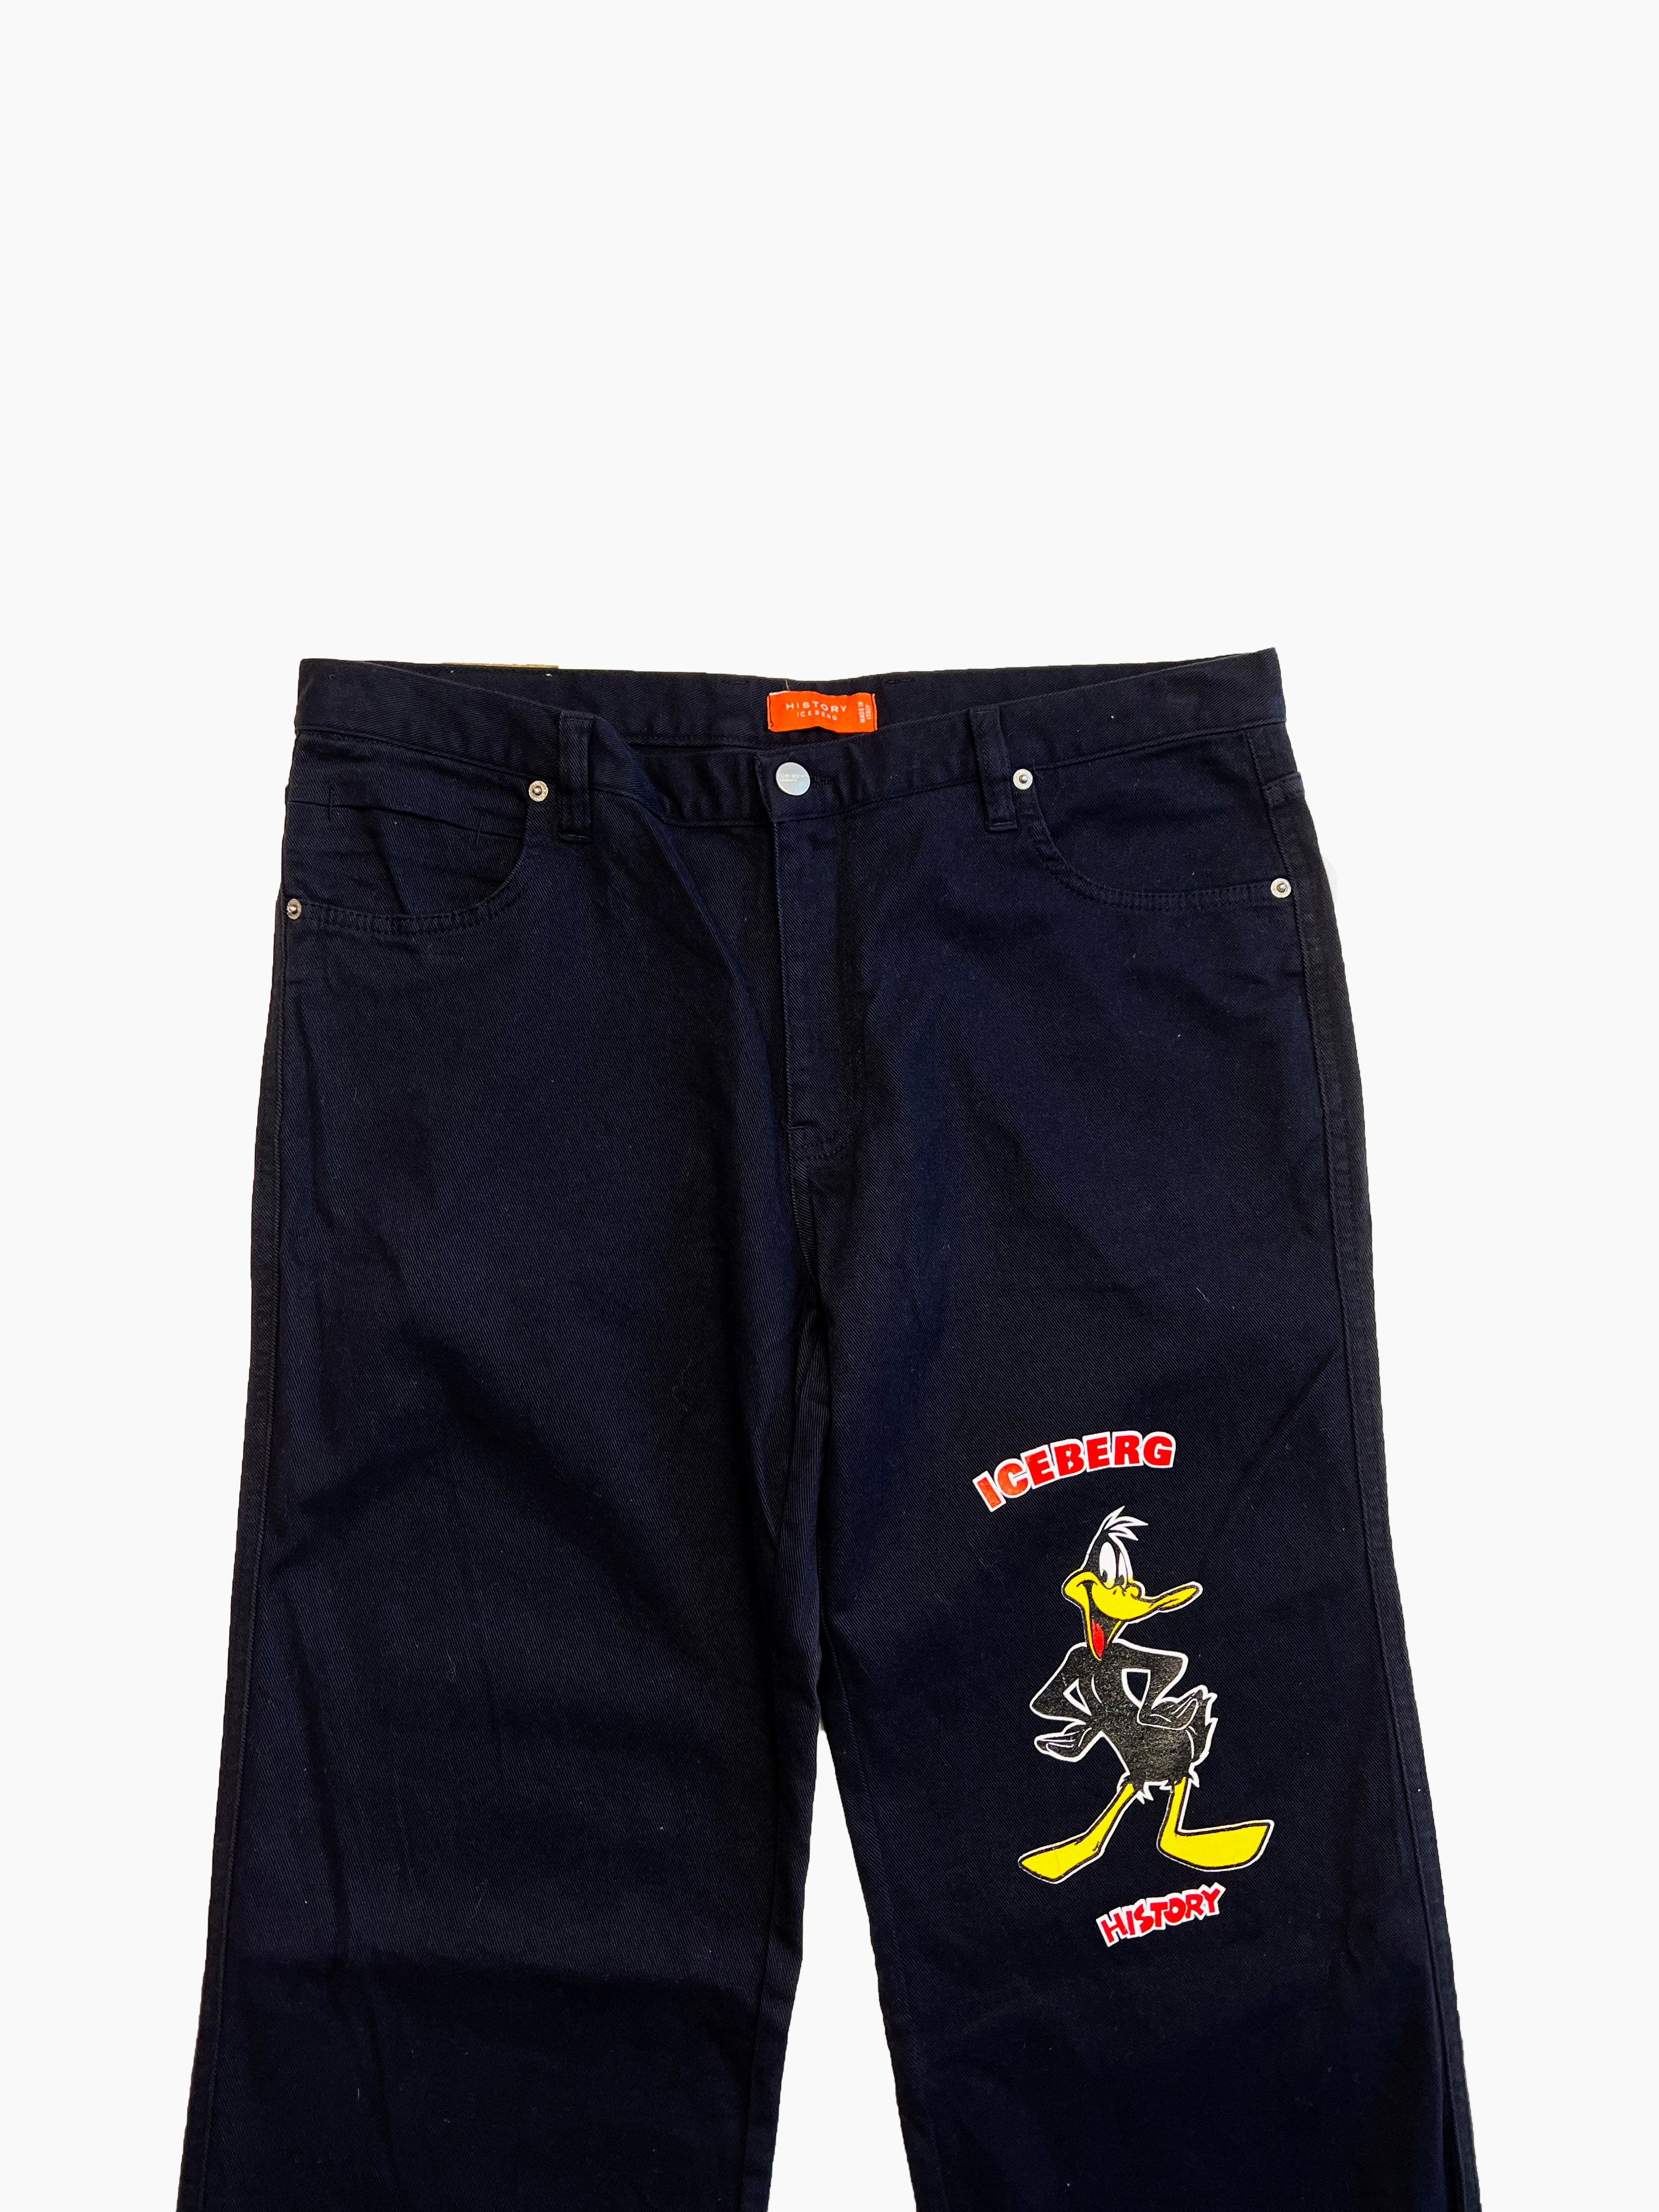 Iceberg History Navy Spell Out Trousers 00's